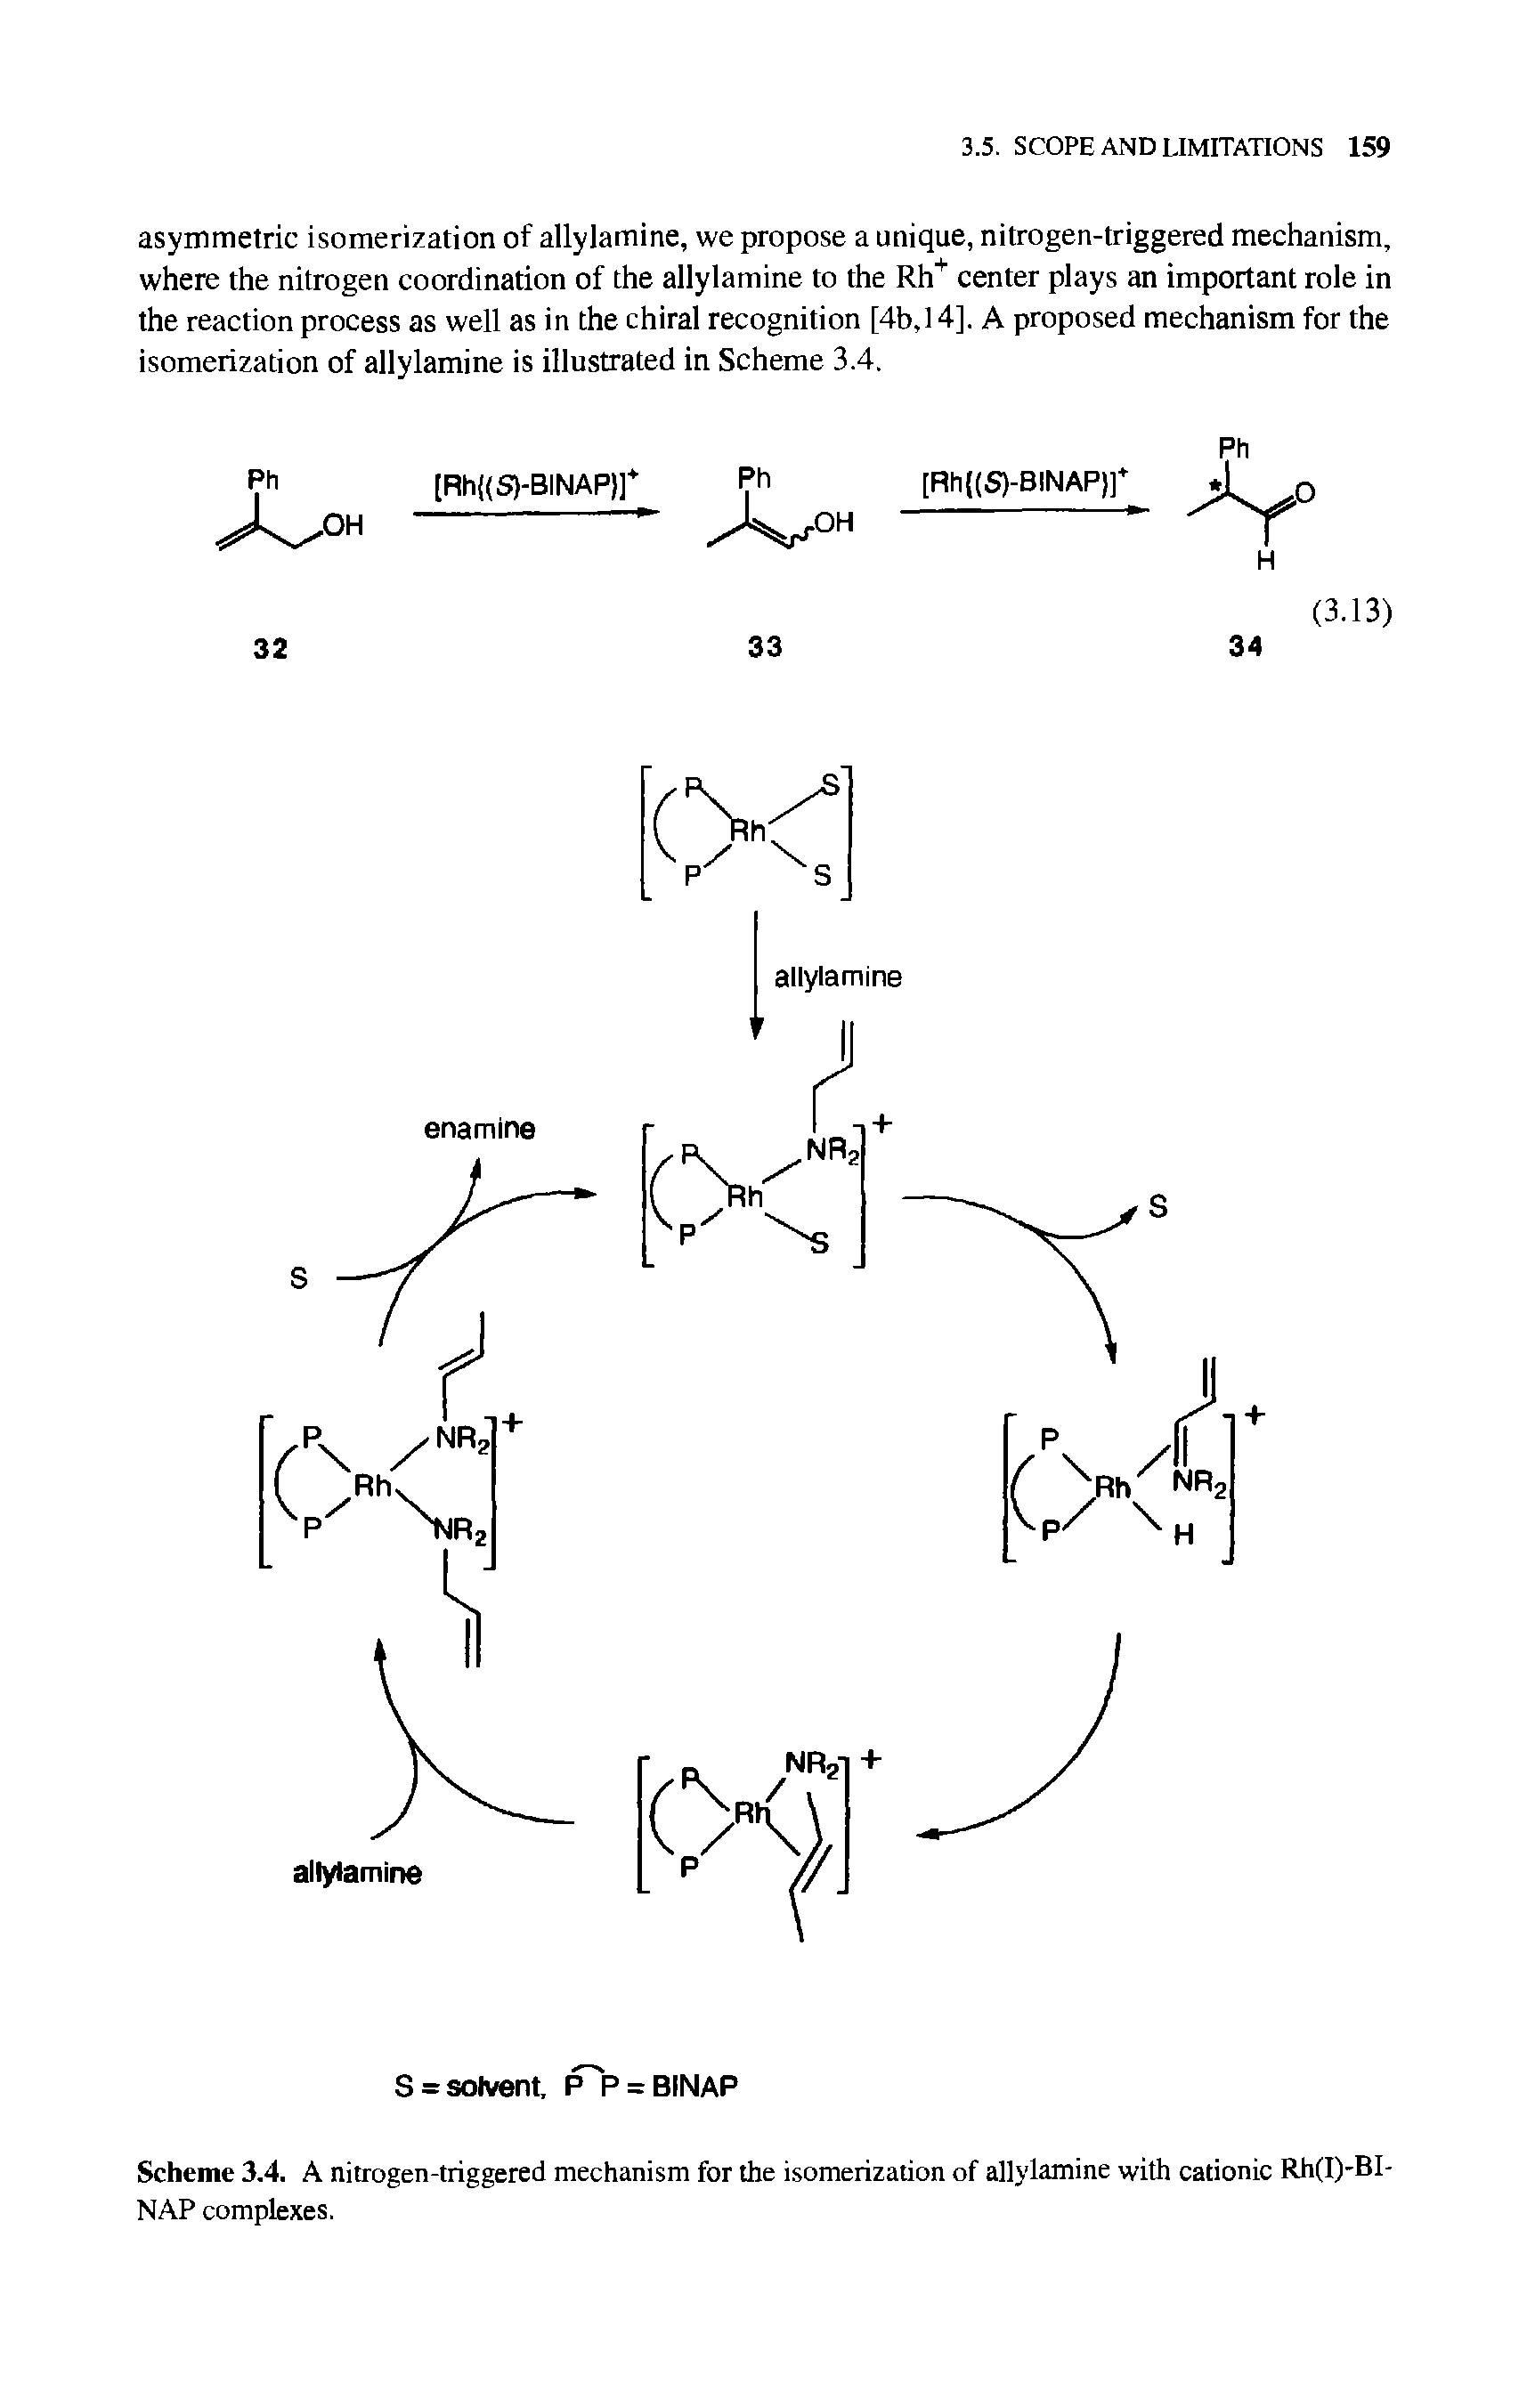 Scheme 3.4. A nitrogen-triggered mechanism for the isomerization of allylamine with cationic Rh(I)-BI-NAP complexes.